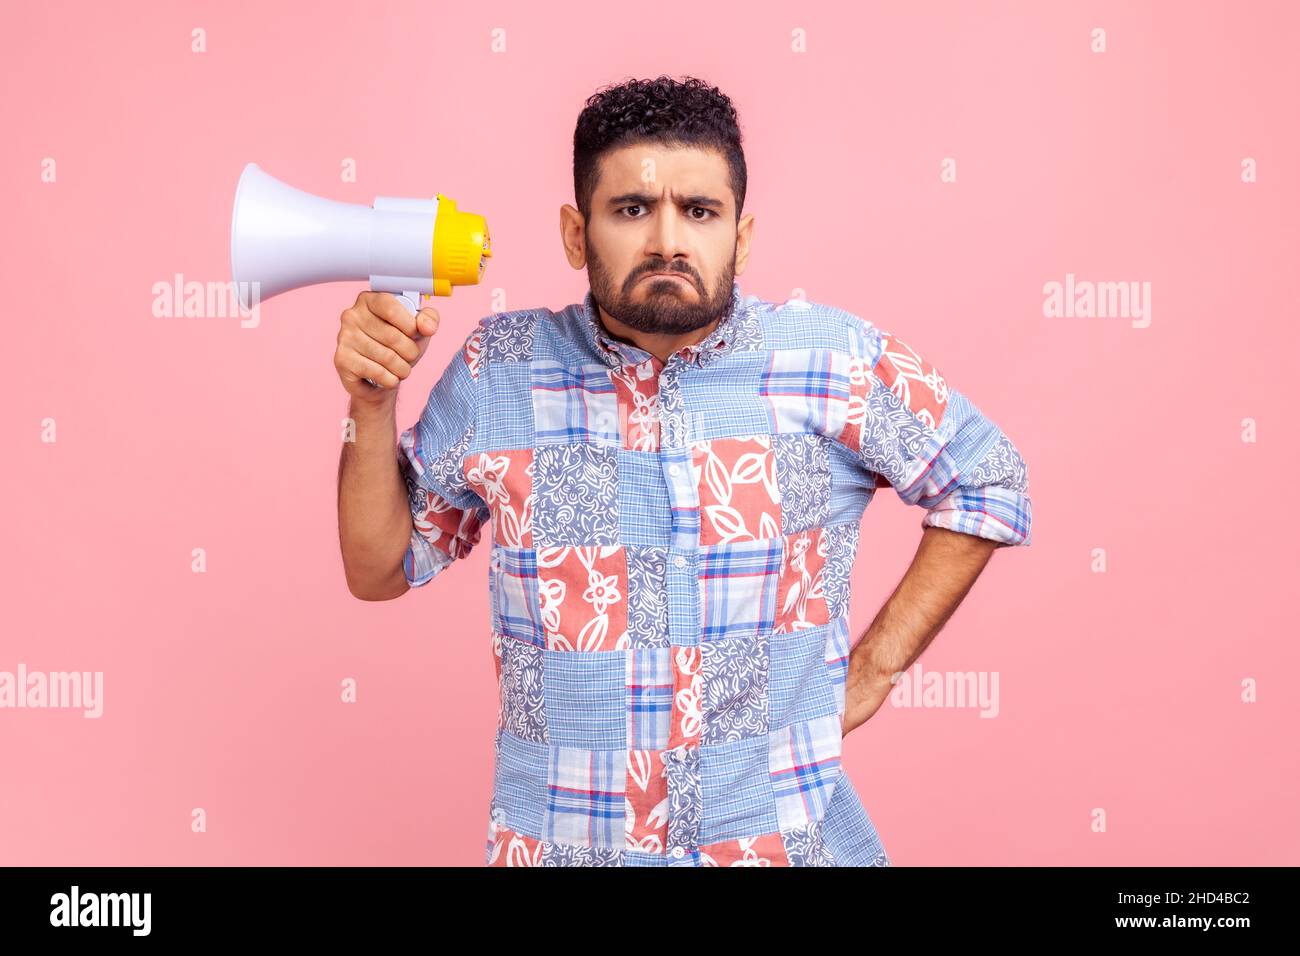 Portrait of strict serious upset man with frowning face holding megaphone looking at camera with sad expression, keeping hand on hip. Indoor studio shot isolated on pink background. Stock Photo